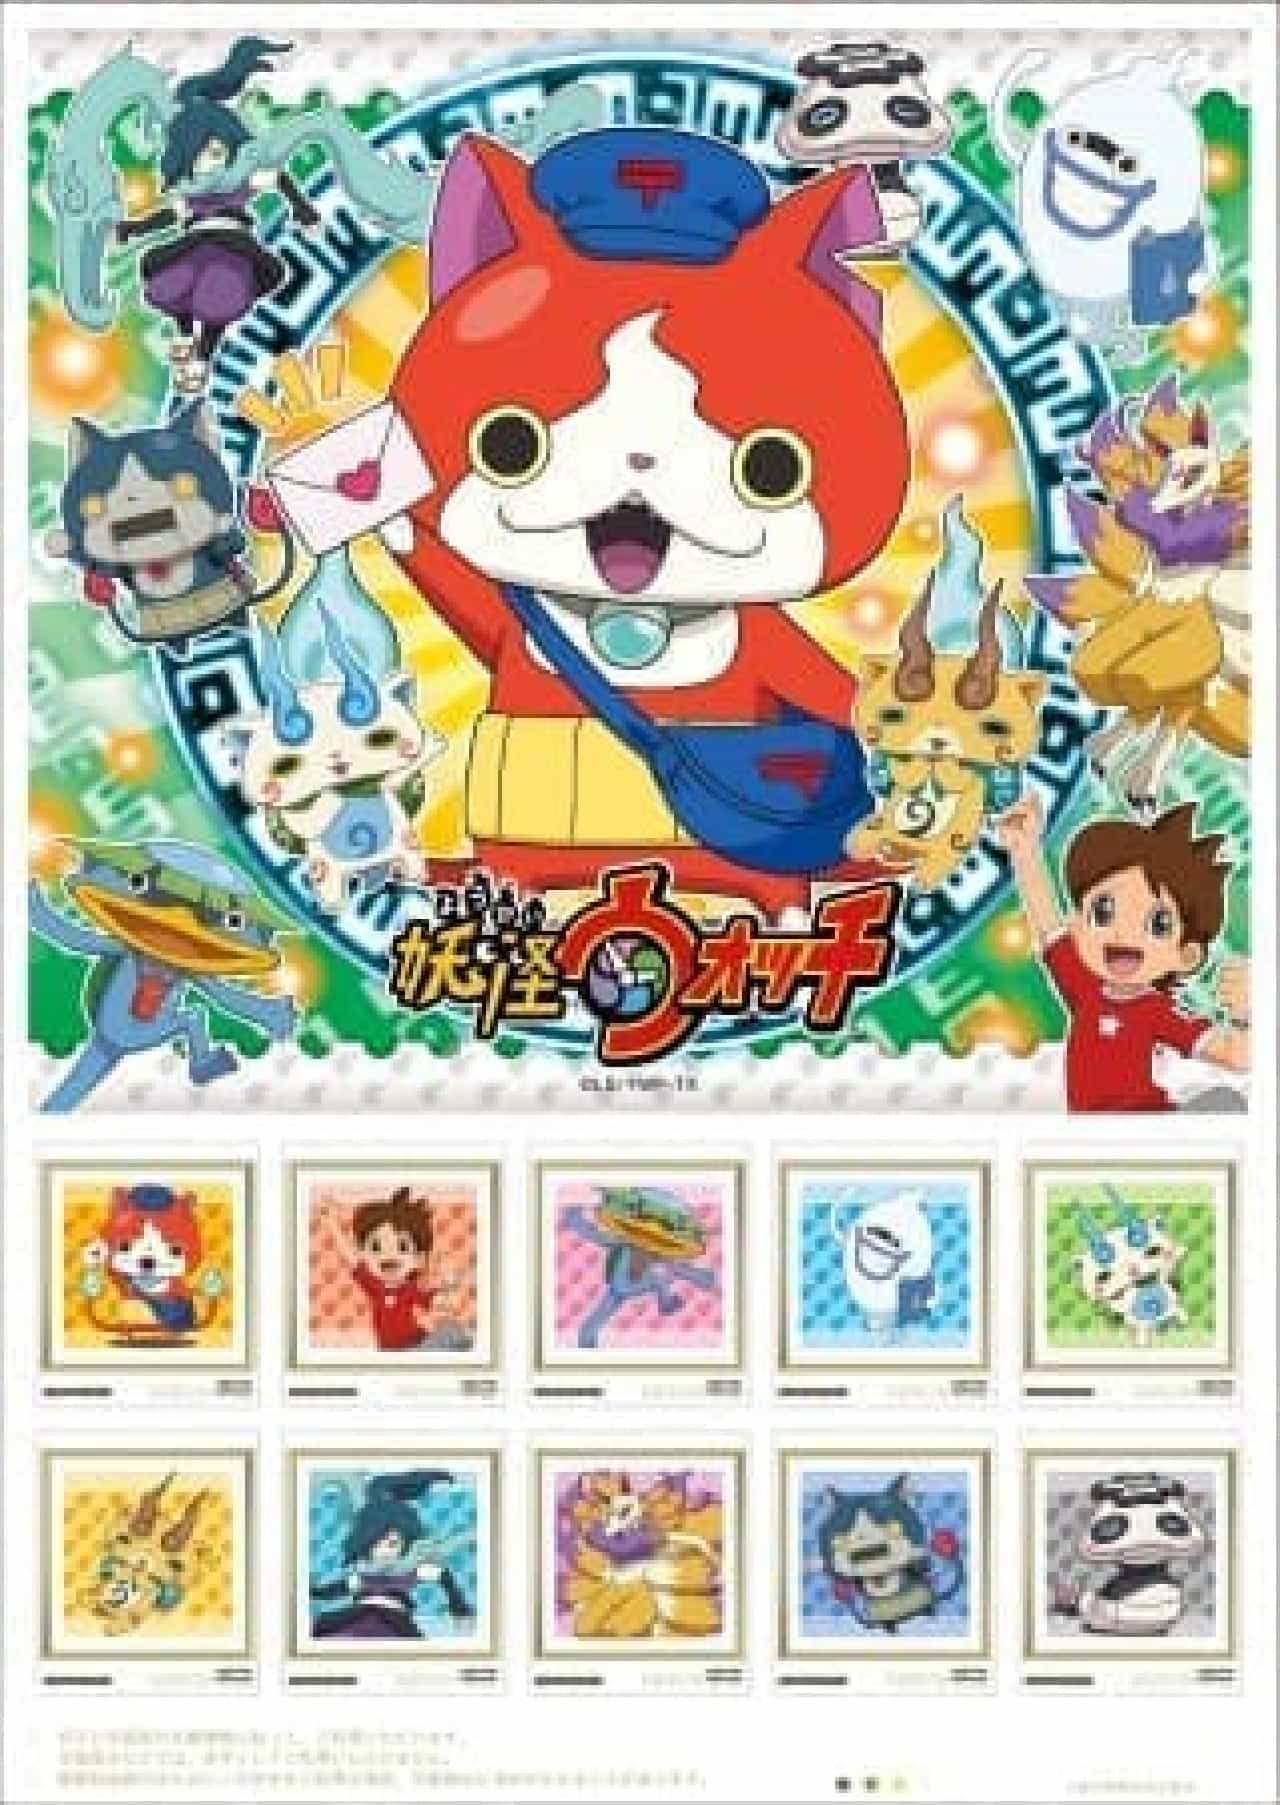 The youkai have finally become stamps! (C) L5 / YWP / TX